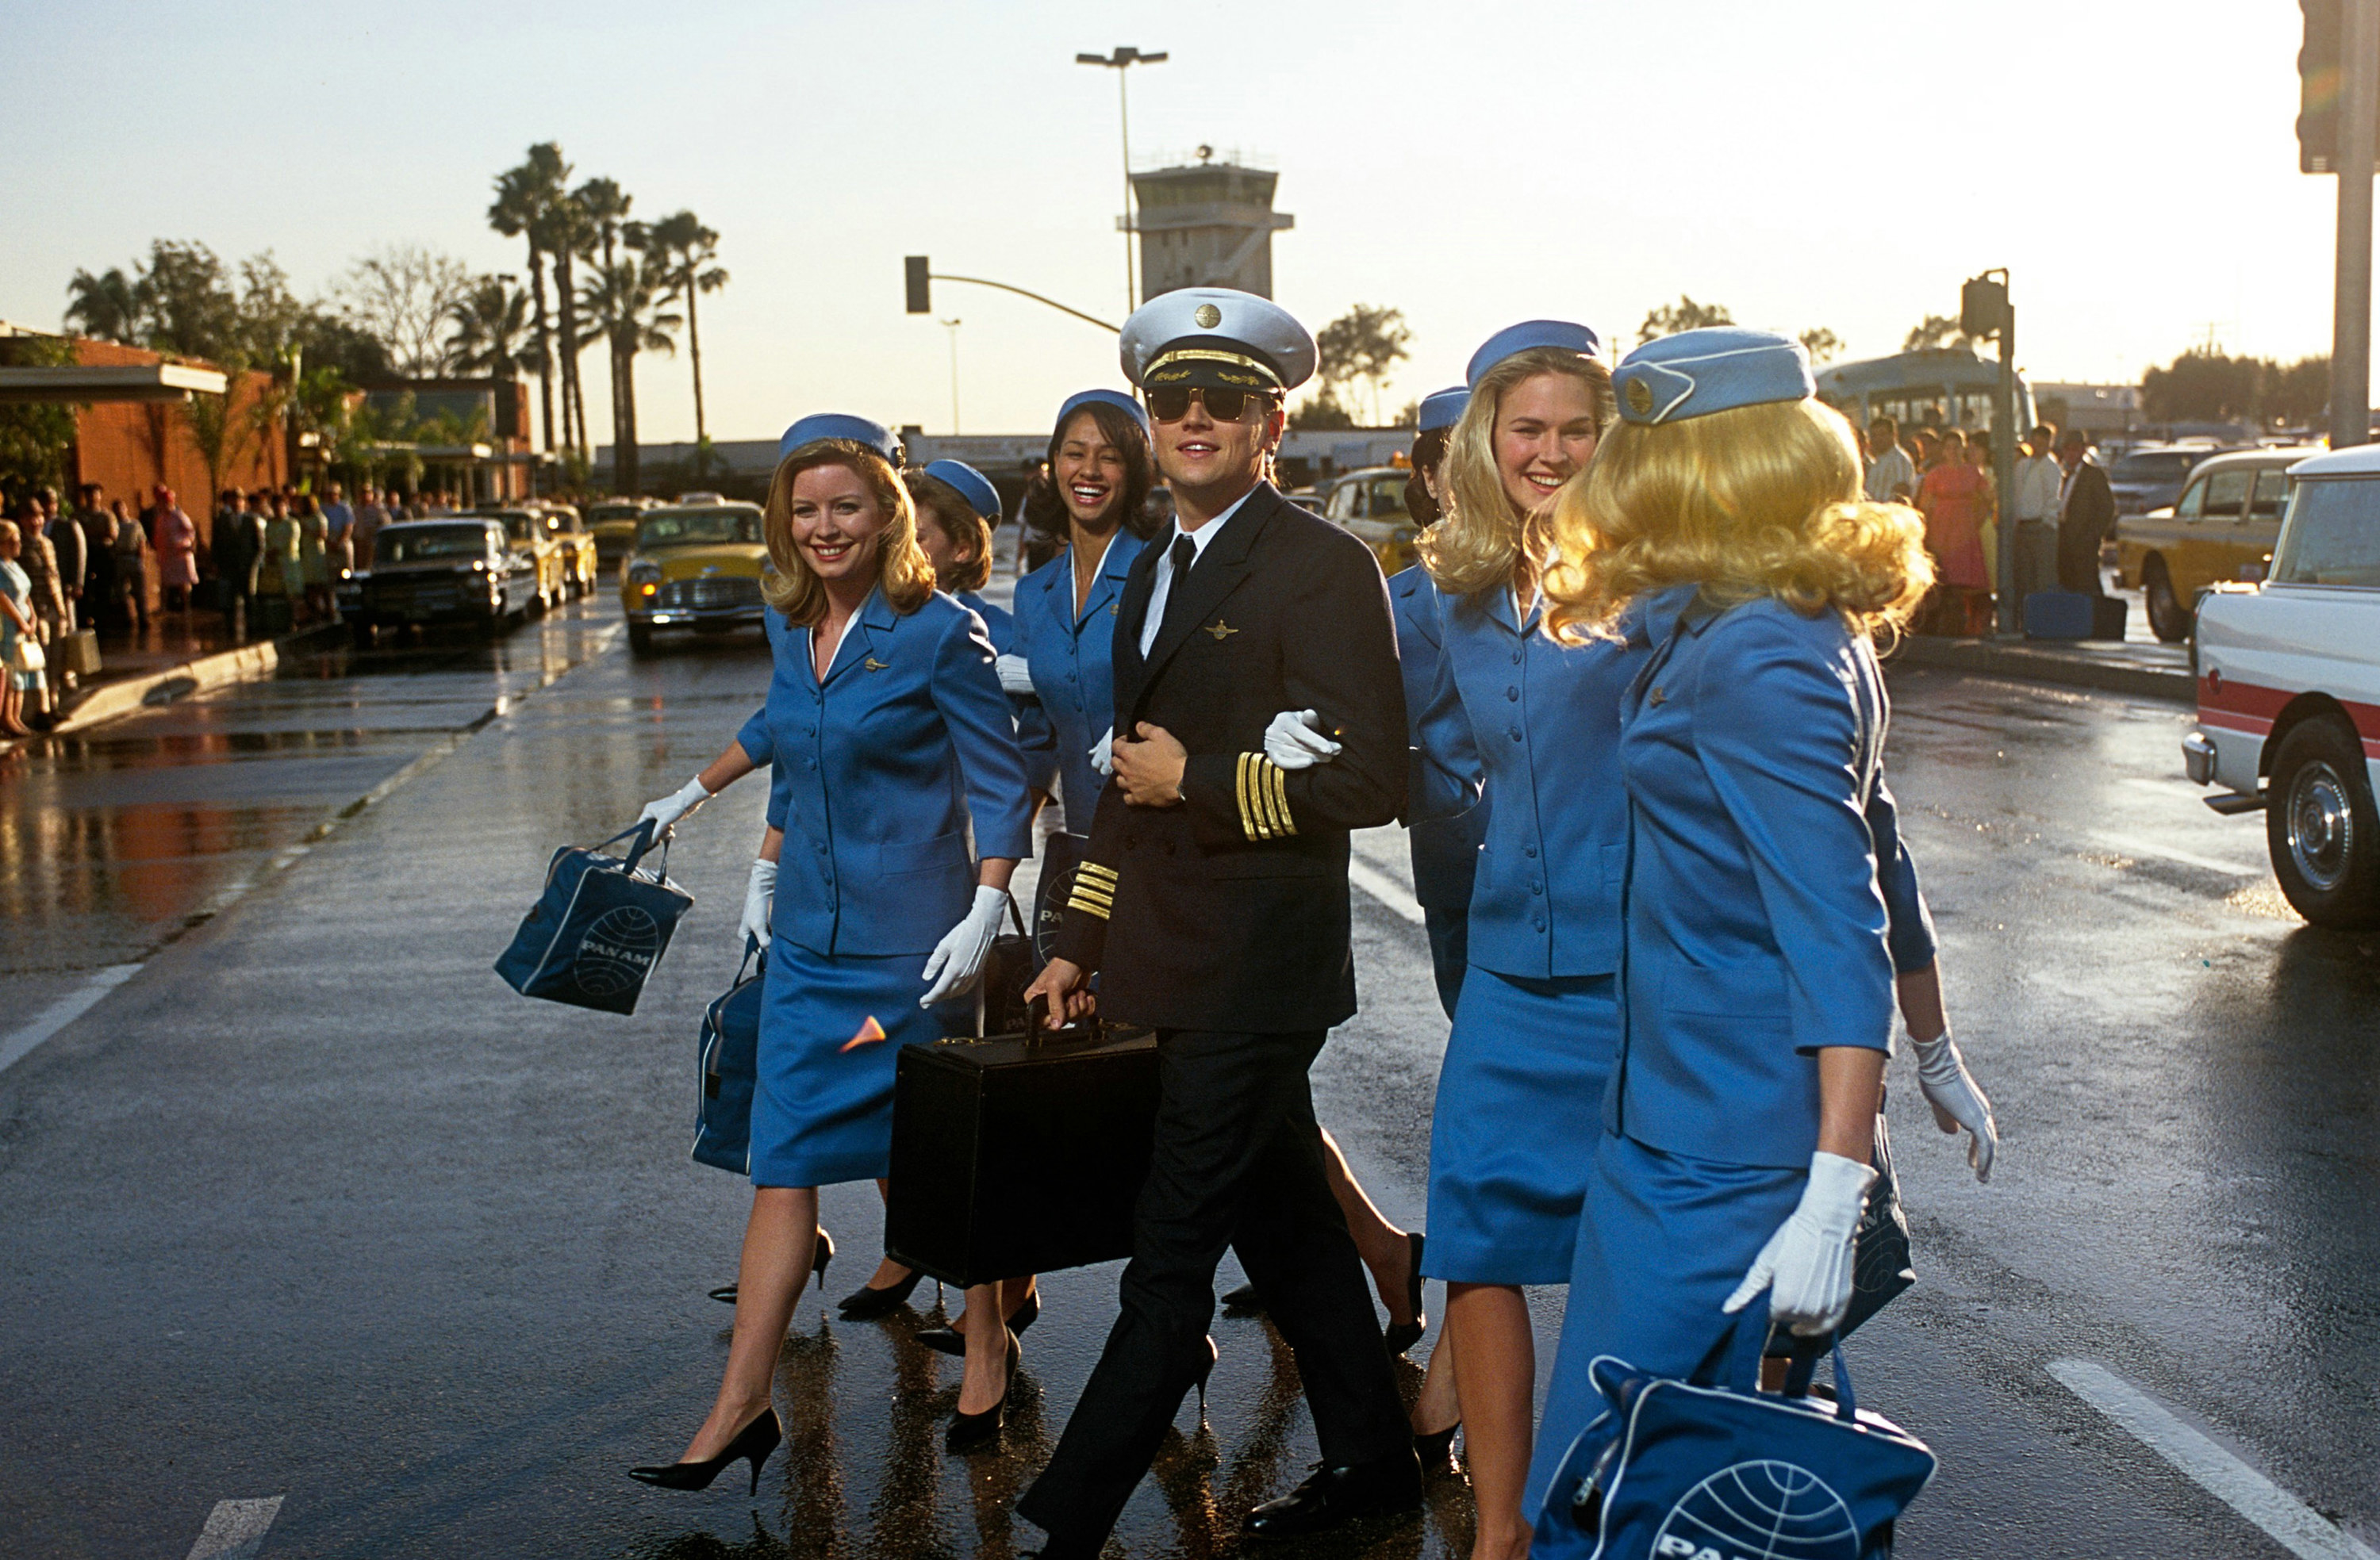 Leonardo DiCaprio walking with a group of flight attendants in &quot;Catch Me if You Can&quot;